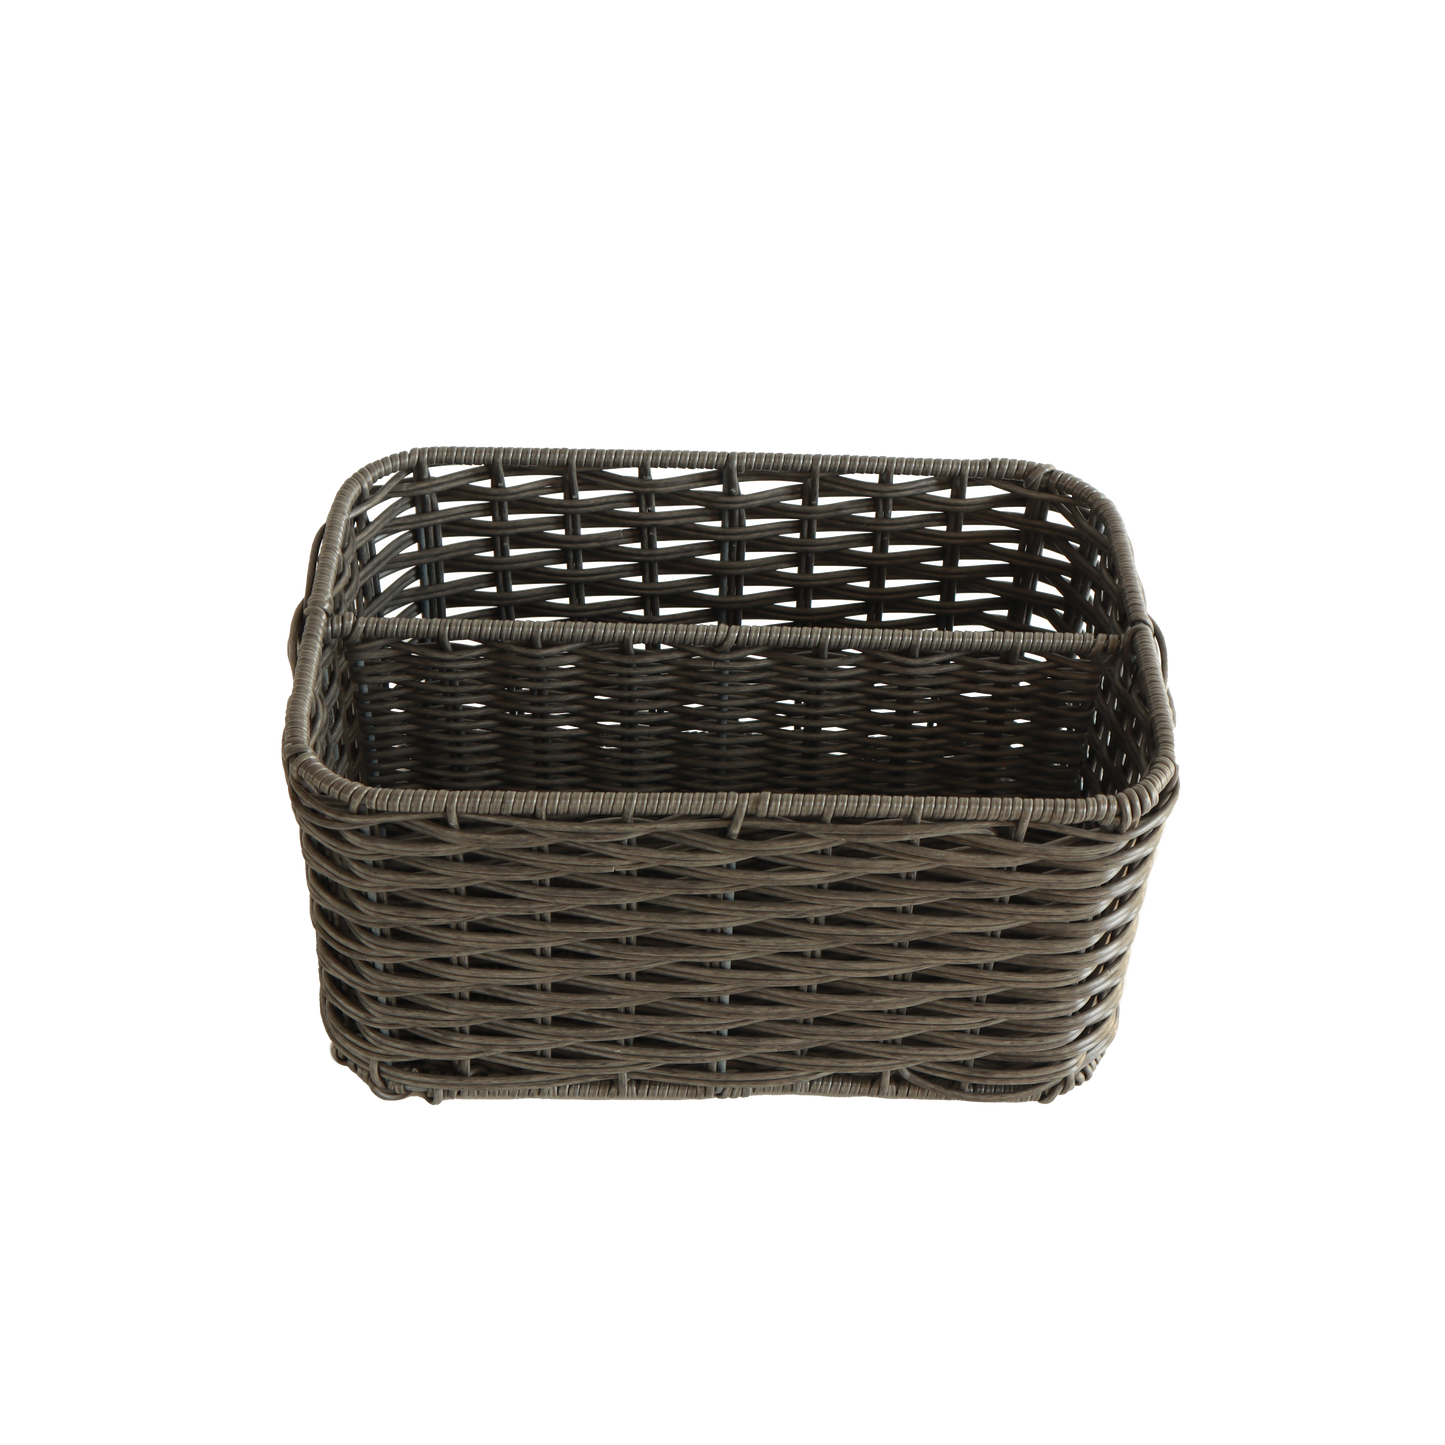 Eden Grace Hand Woven Resin Wicker Basket for Storage with Iron Frame and Dual Compartments - in Tan, Gray, and White